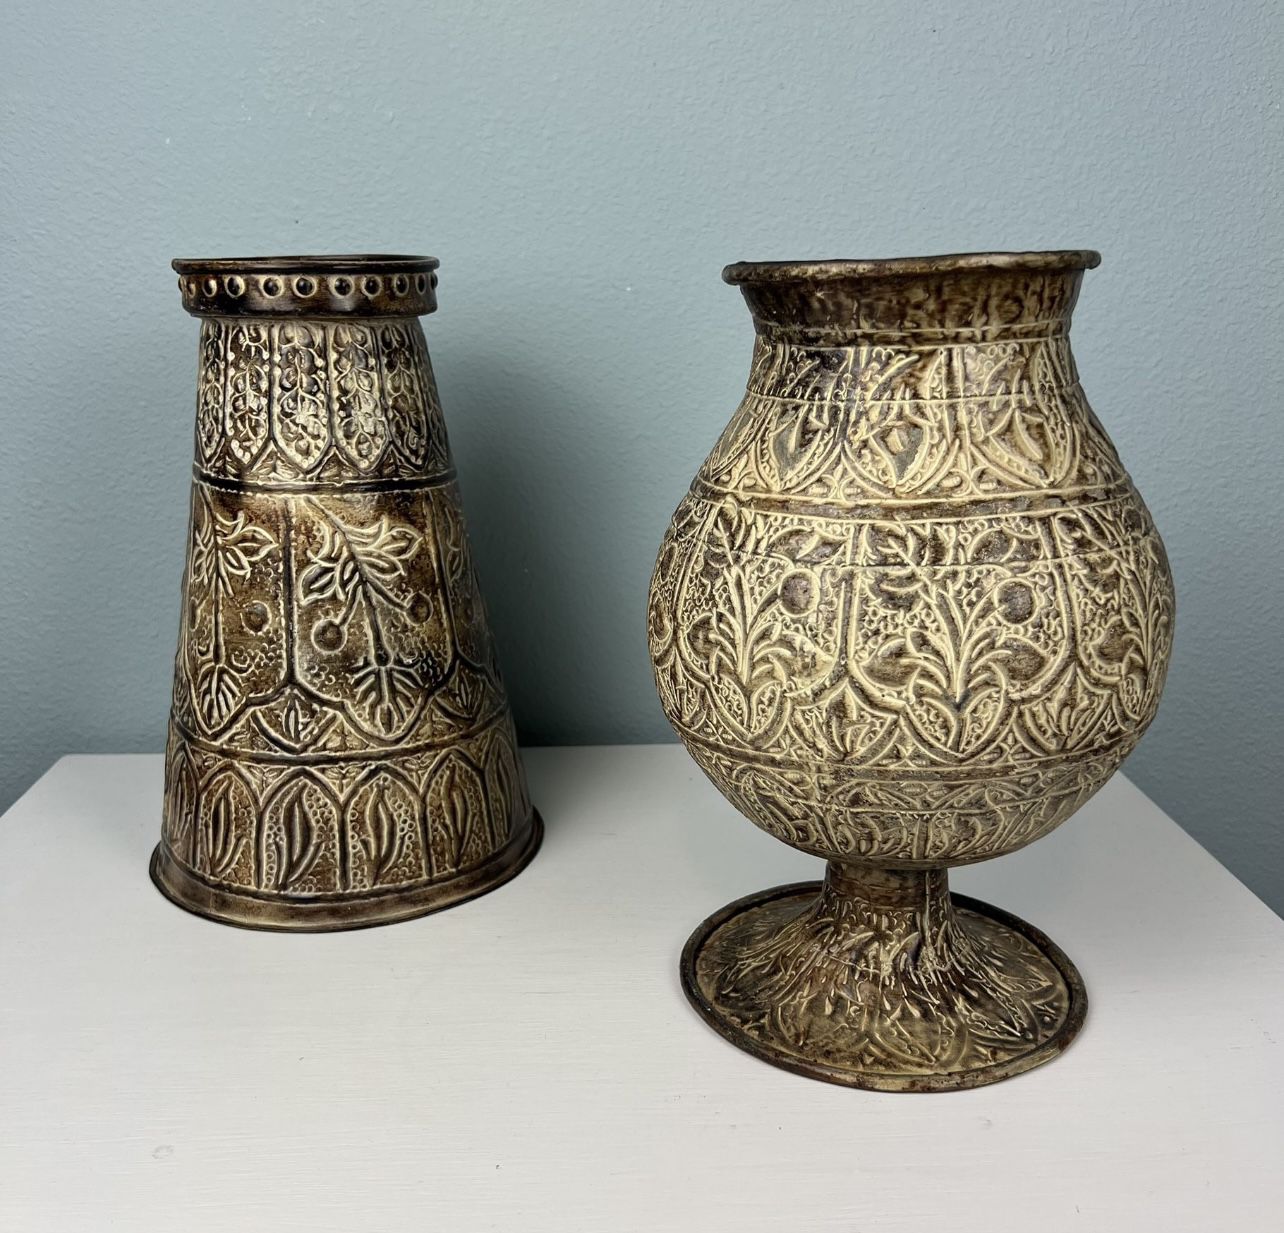 2 Metal Engraved Italy Themed Vases